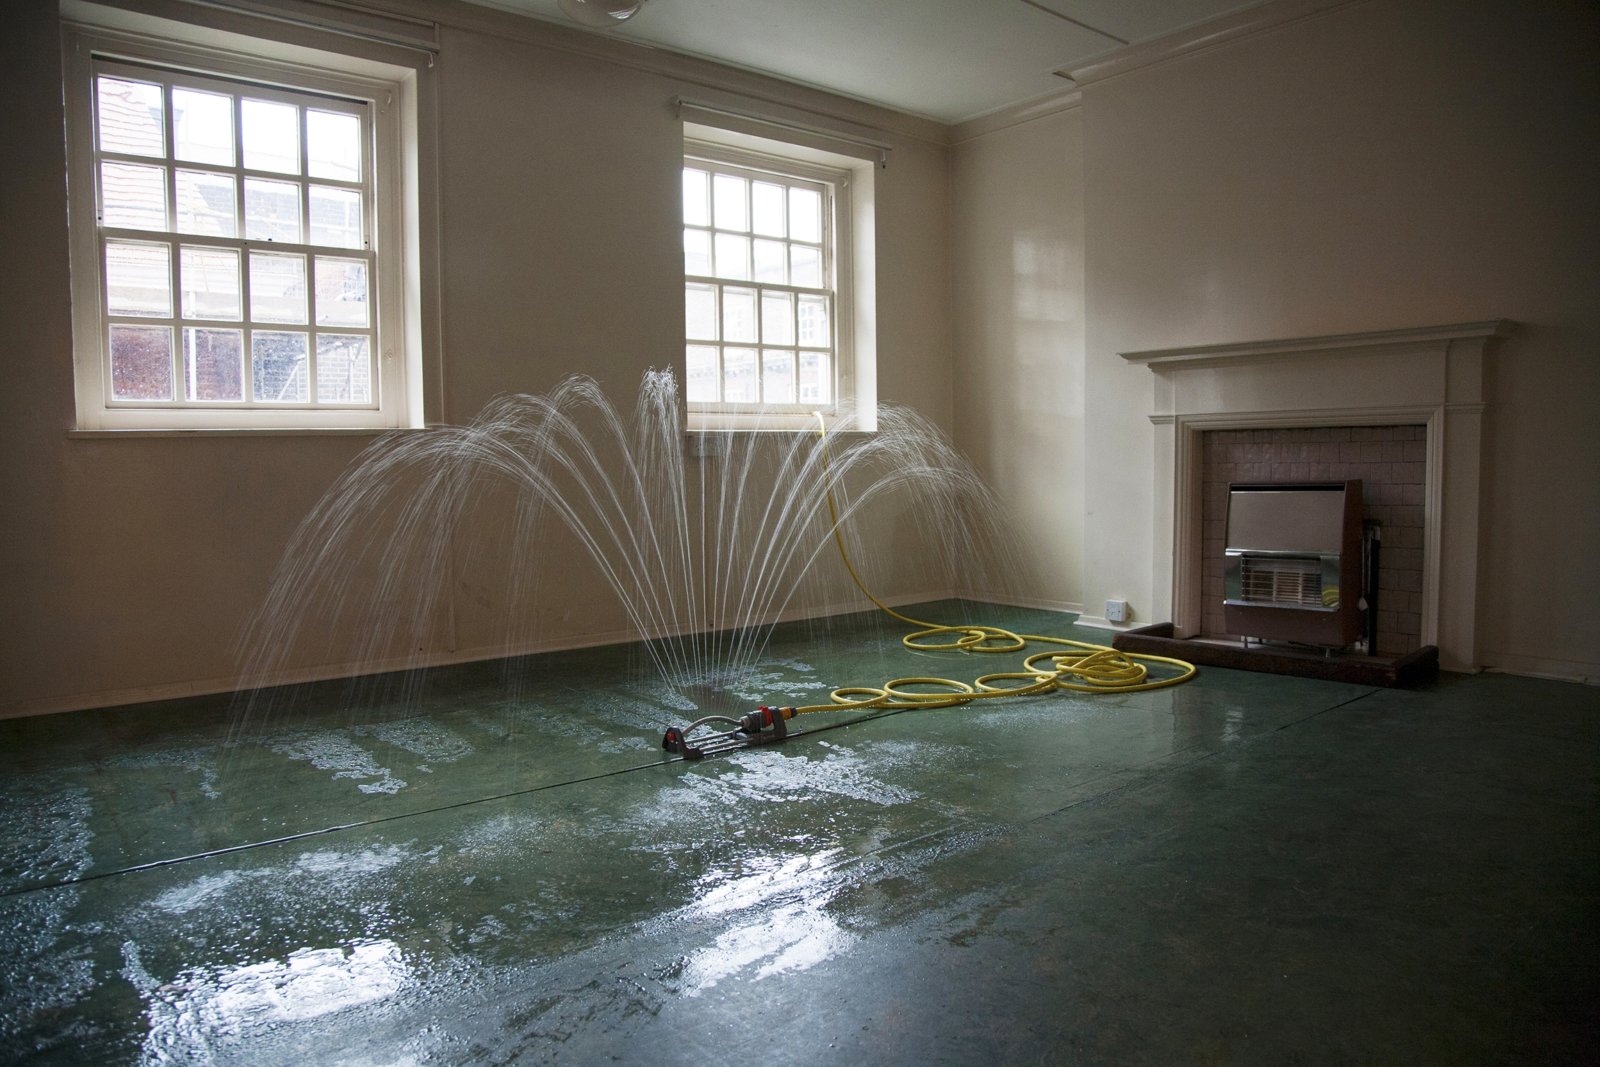 Abbas Akhavan, Study for a Garden: Fountain, 2012, oscillating water sprinkler, pump, hose, pvc pond liner, water, dimensions variable. Installation view, Study for a Garden, Delfina Foundation, London, UK, 2012